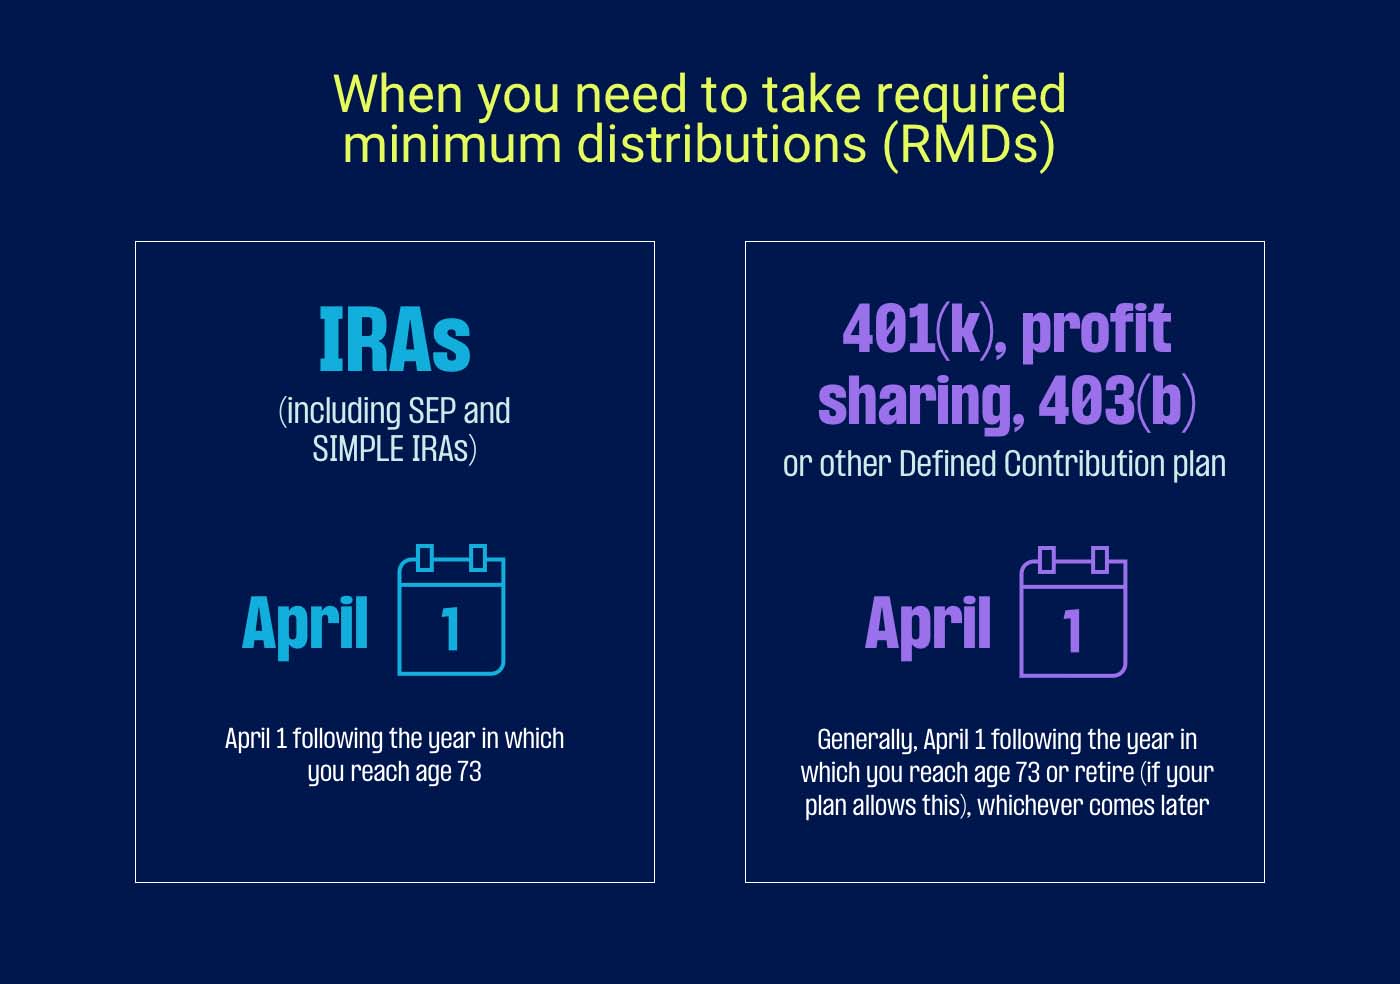 Take RMDs for IRA, 401(k), profit sharing, 403(b), other DC plans on April 1 following the year in which you reach 73.